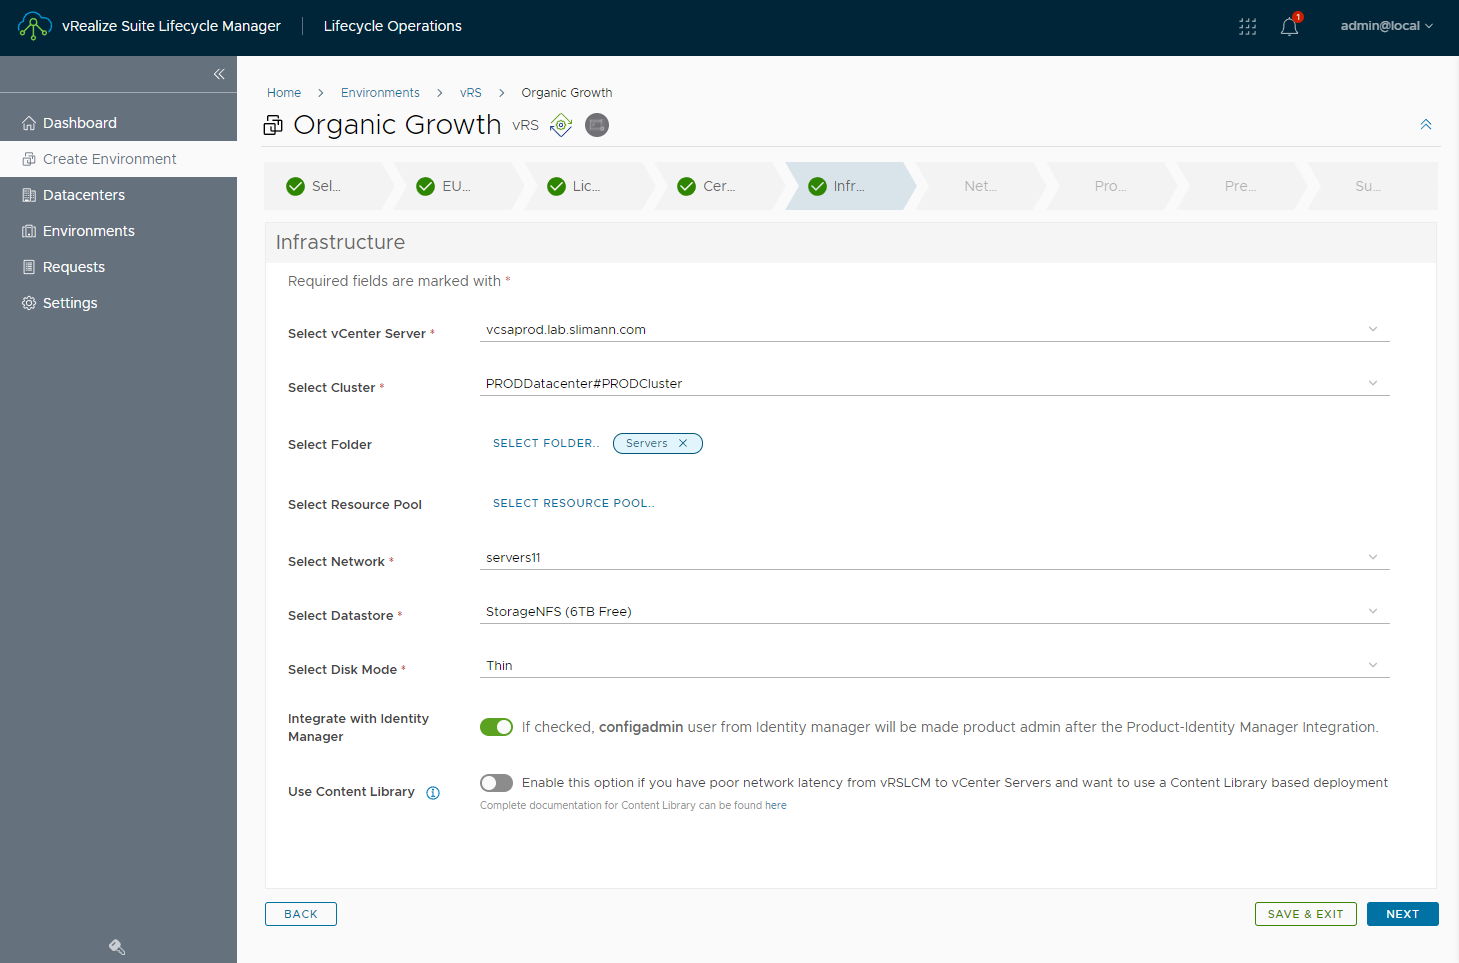 Integrate with Identity Manager.